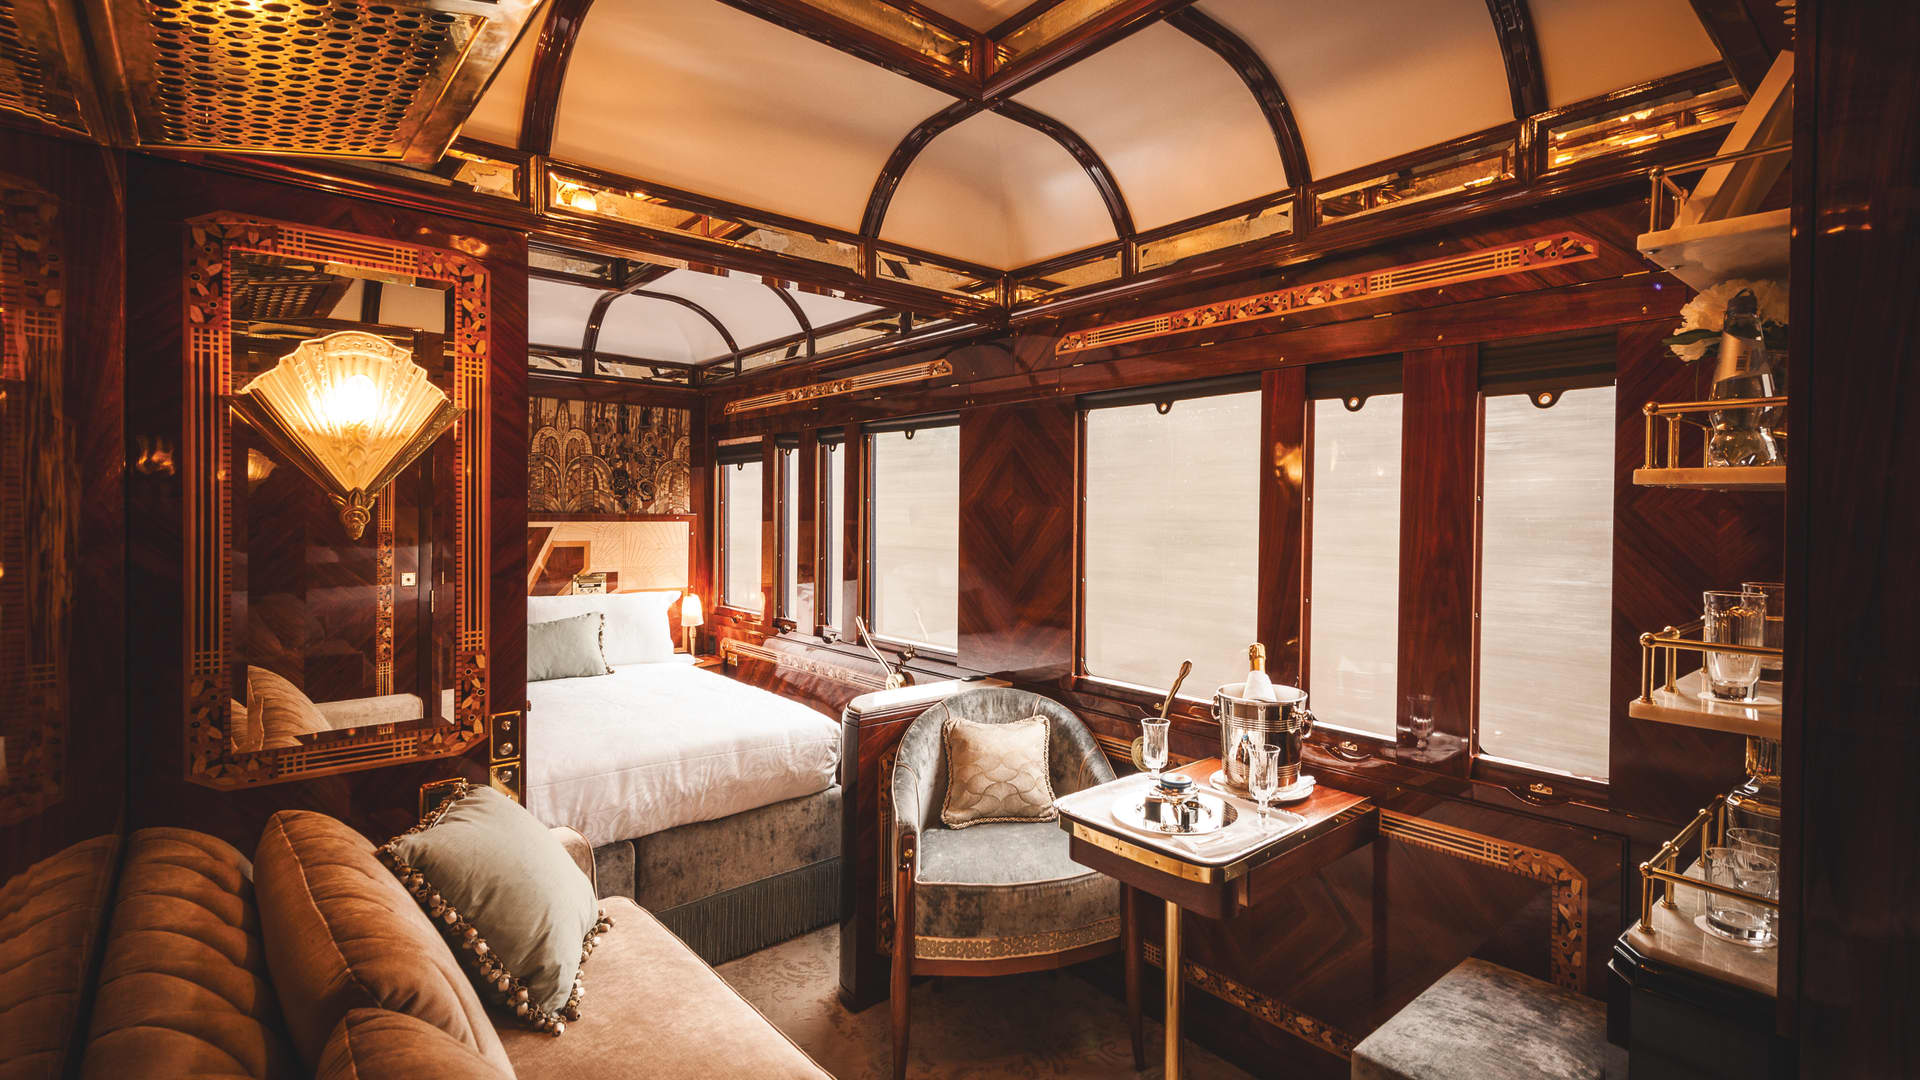 The Venice Simplon-Orient-Express will launch eight new suites in June 2023.